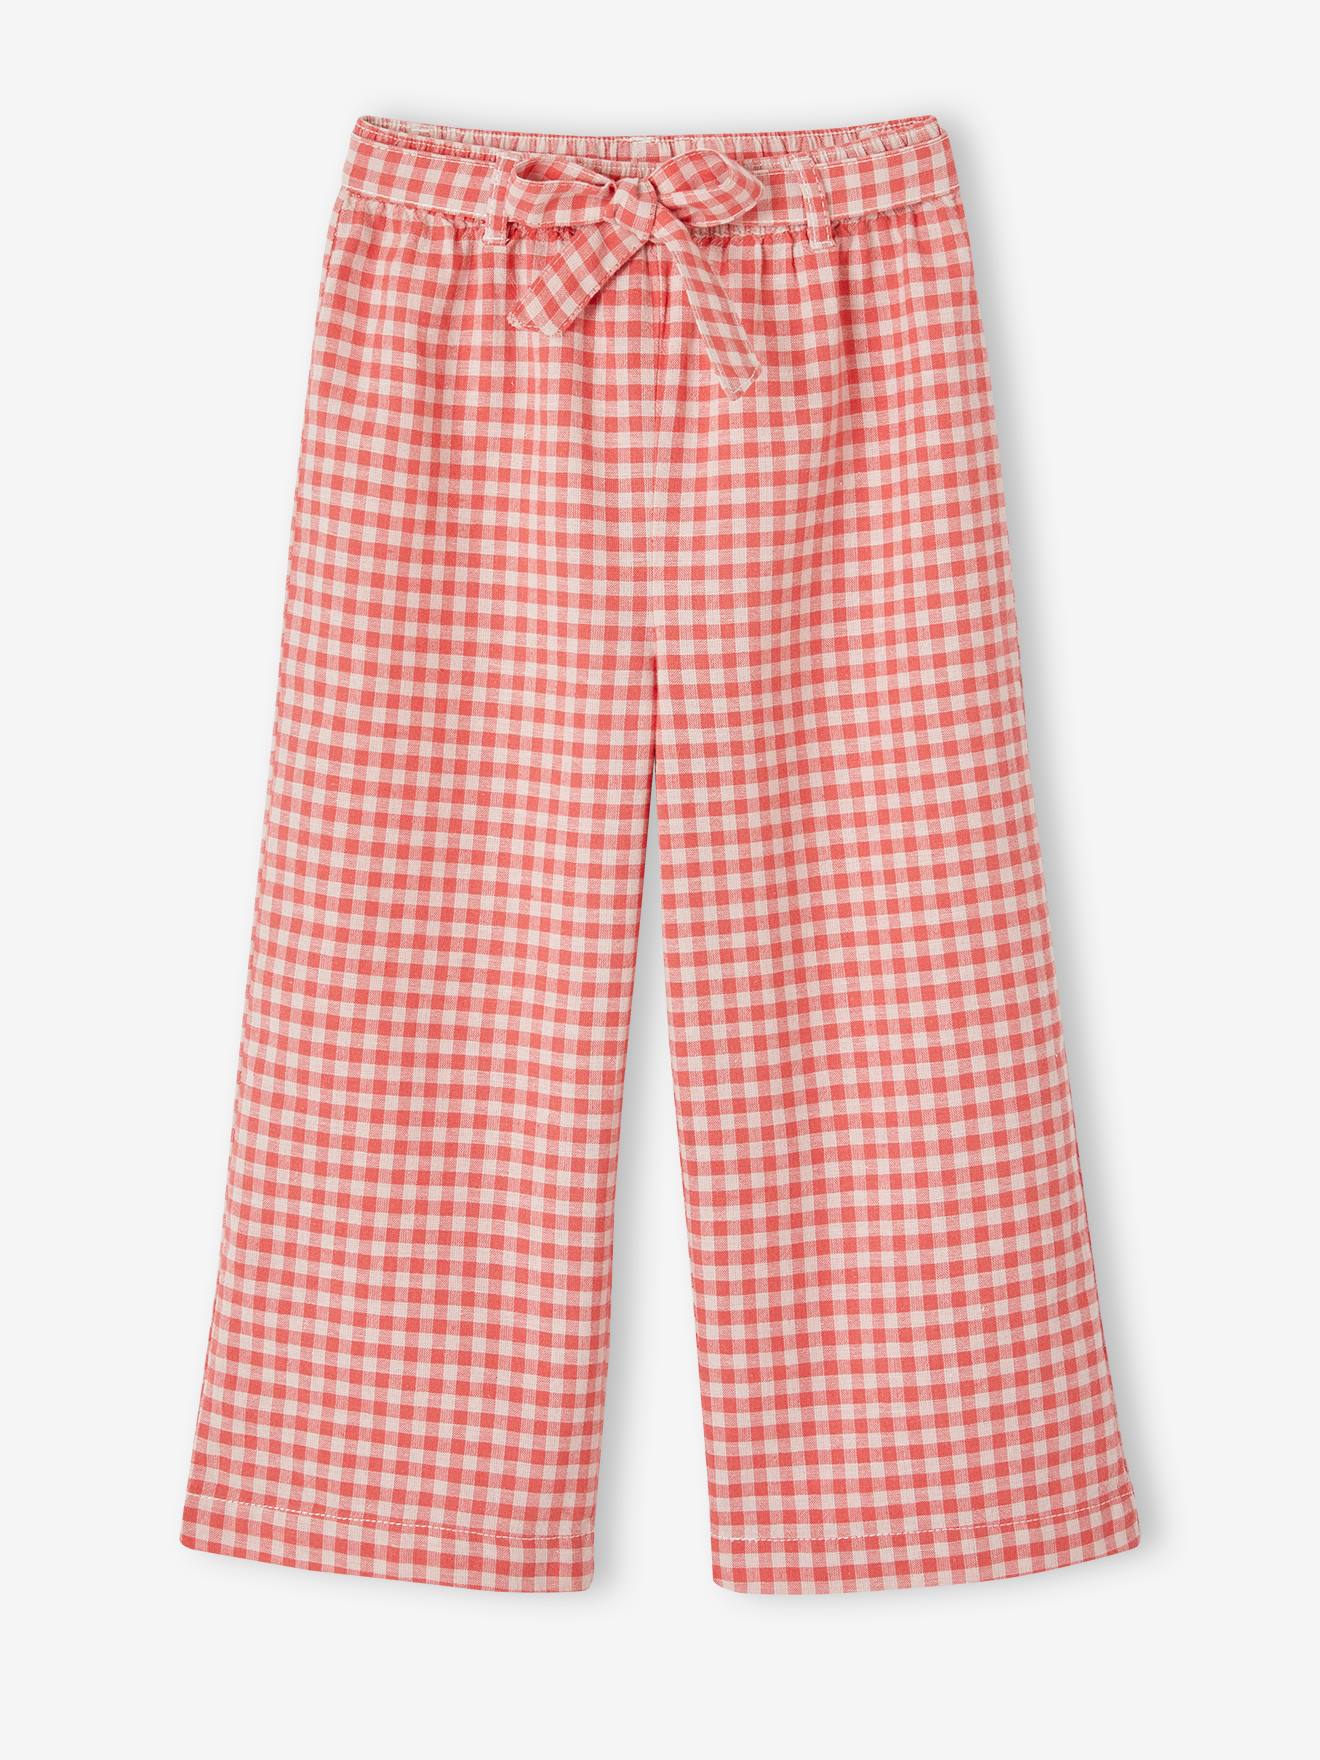 Wide-Leg, Printed Cropped Trousers for Girls chequered red